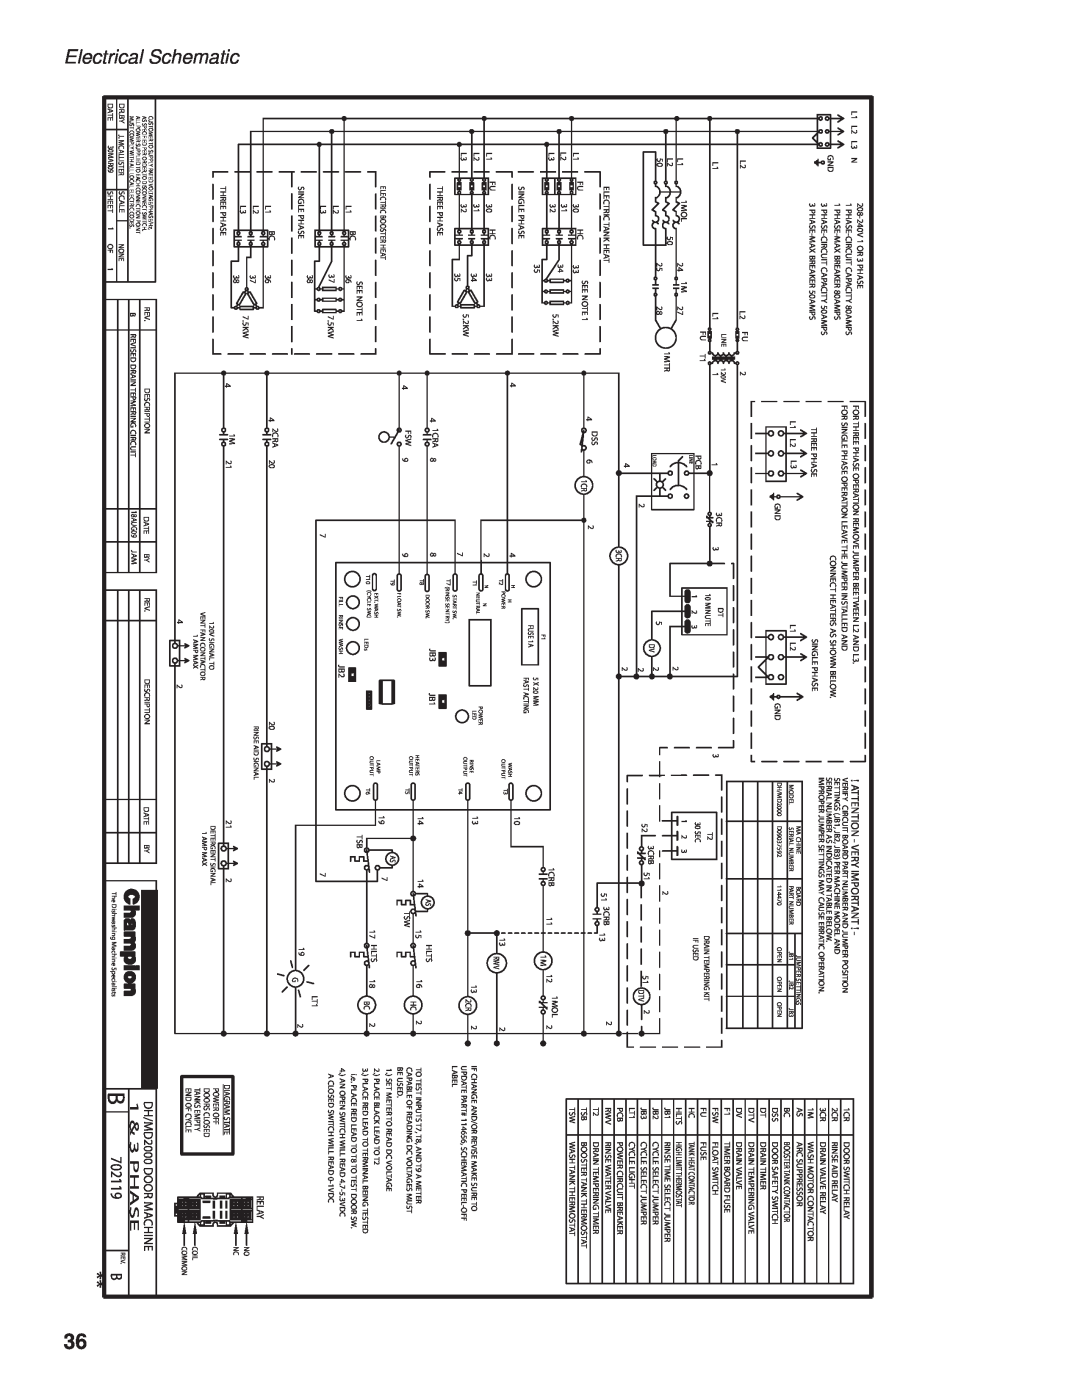 GE DH2000 operation manual 1 & 3 PHASE, Electrical, 702119, At! Tention - Very Important, DH/MD2000 DOOR MACHINE 